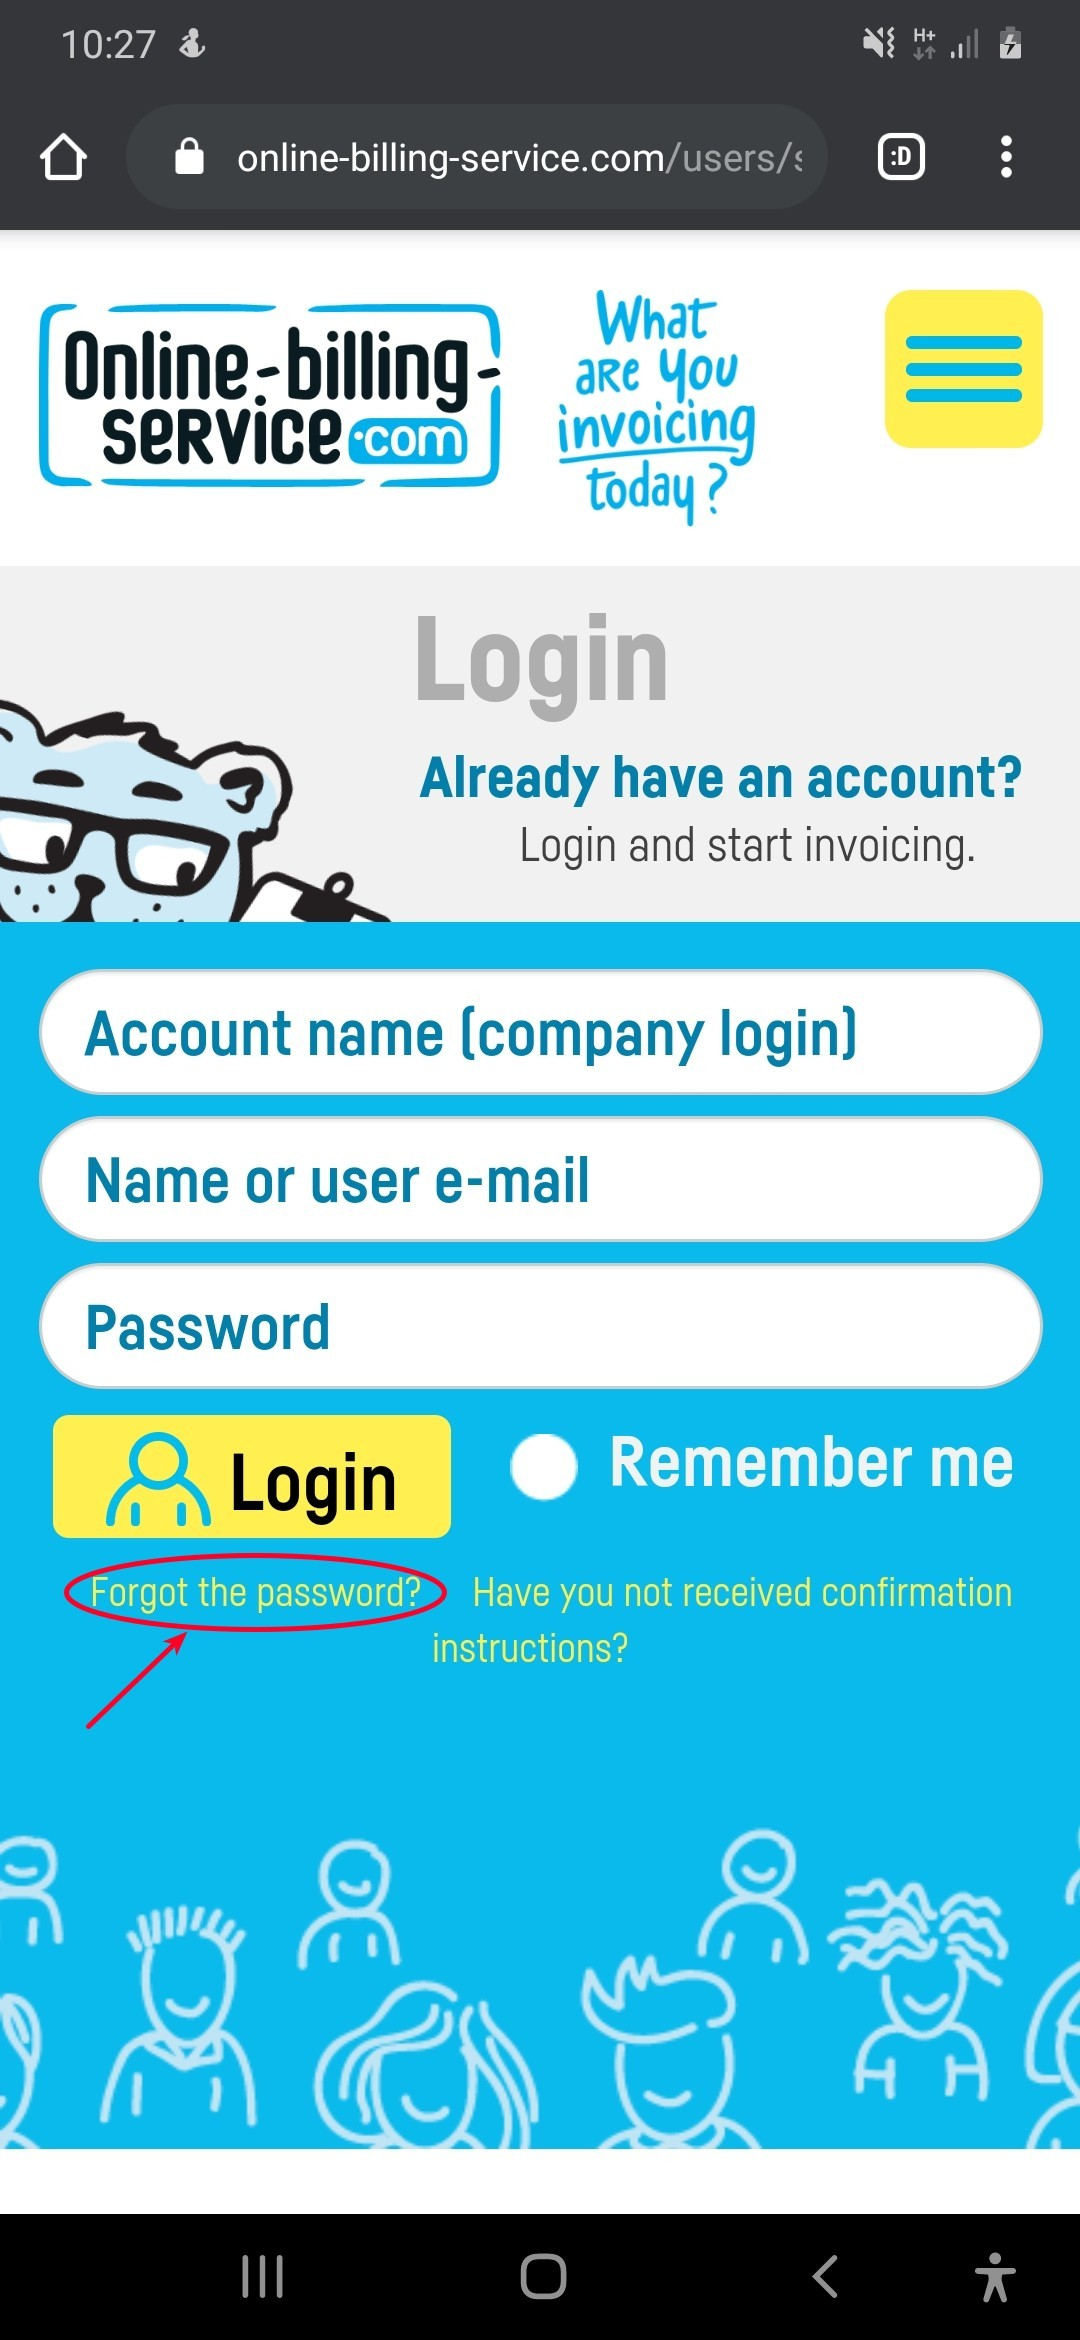 Forgot login data? See instructions to recover them - step 2